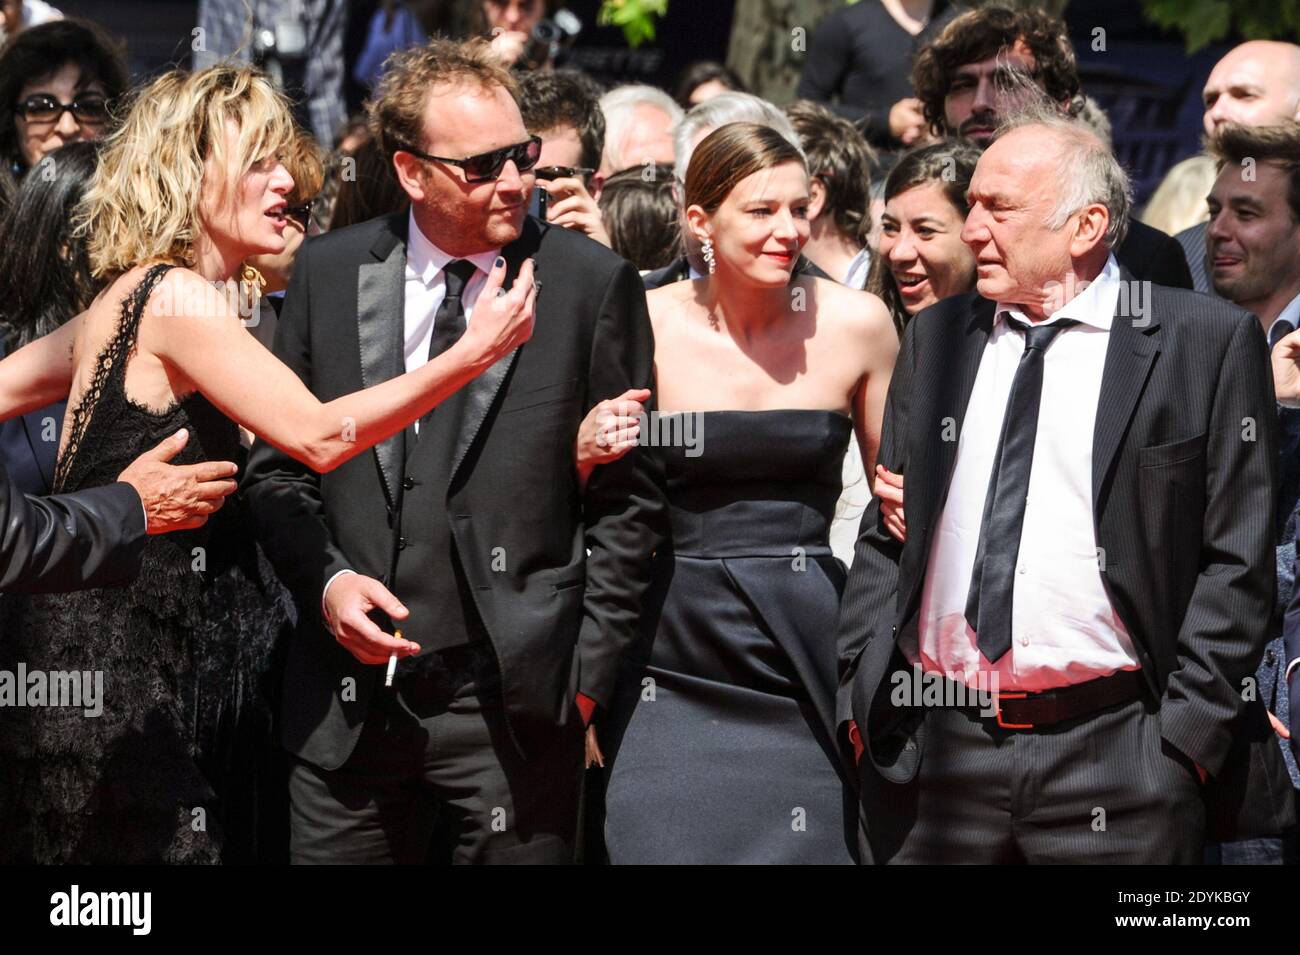 Marisa Borini, Valeria Bruni-Tedeschin, Filippo Timi, and Andre Wilms arriving for 'Un Chateau En Italie' held at the Palais Des Festivals as part of the 66th Cannes Film Festival in Cannes, France on May 20, 2013. Photo by Aurore Marechal/ABACAPRESS.COM Stock Photo